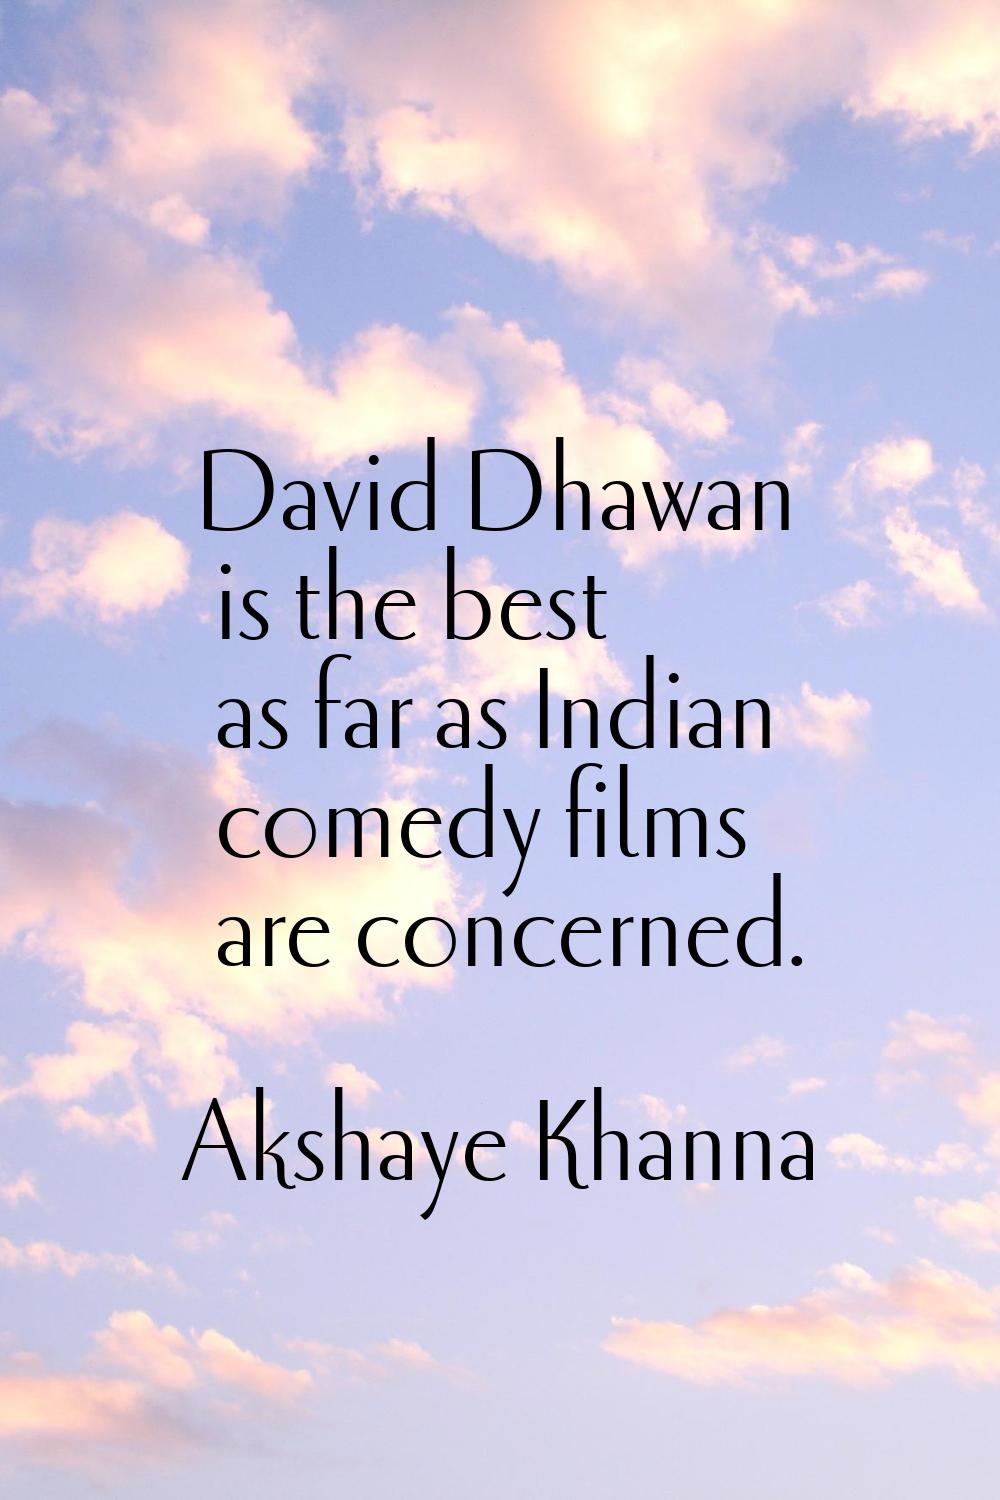 David Dhawan is the best as far as Indian comedy films are concerned.